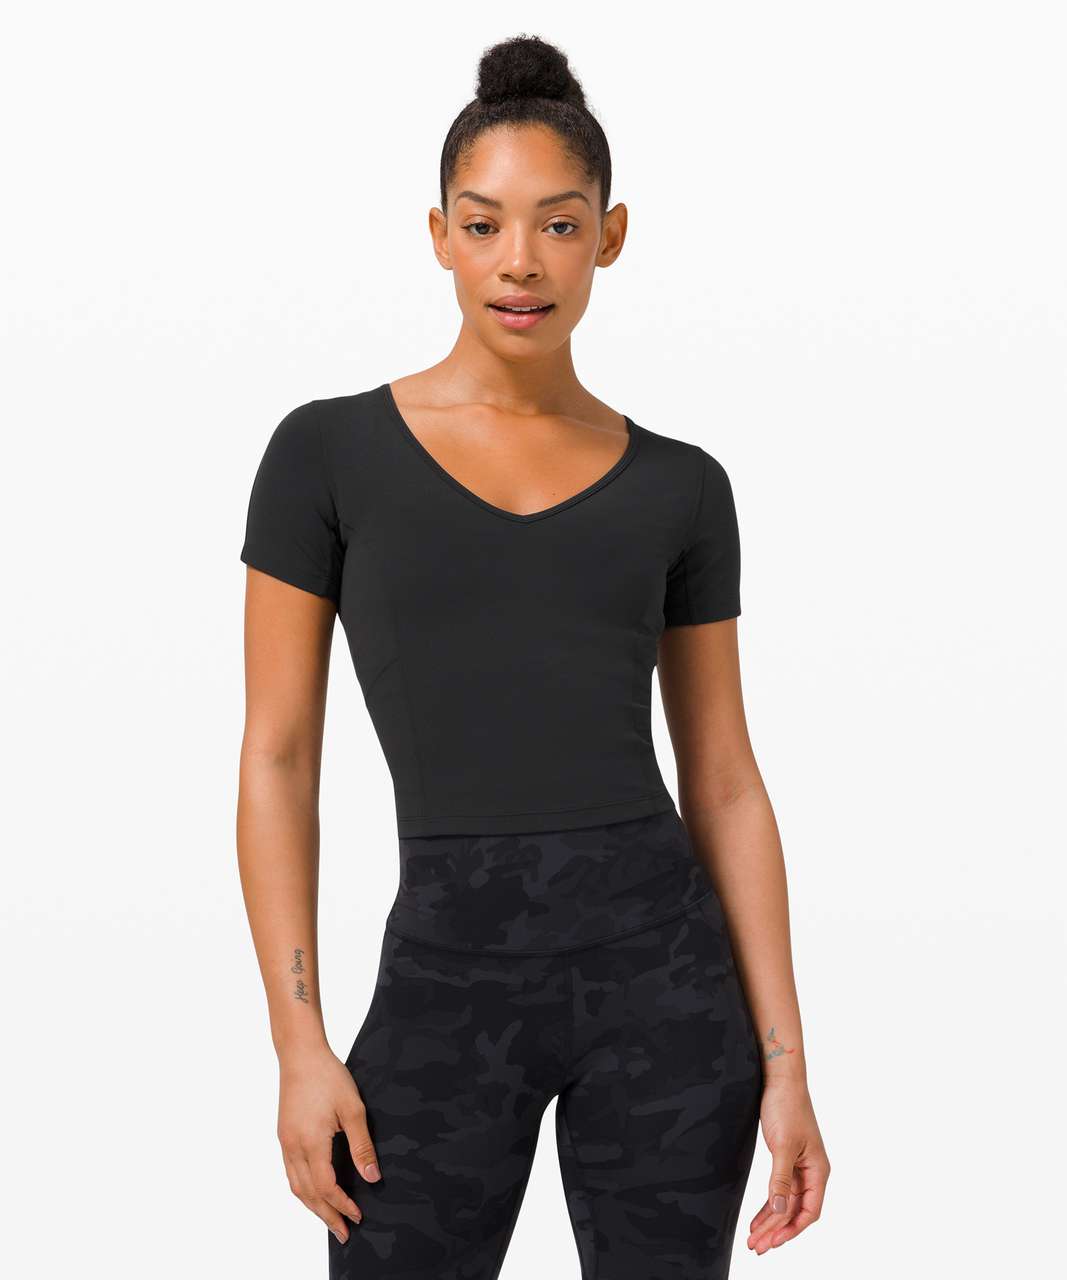 don't sleep on the nulu cropped slim short sleeves! size 4